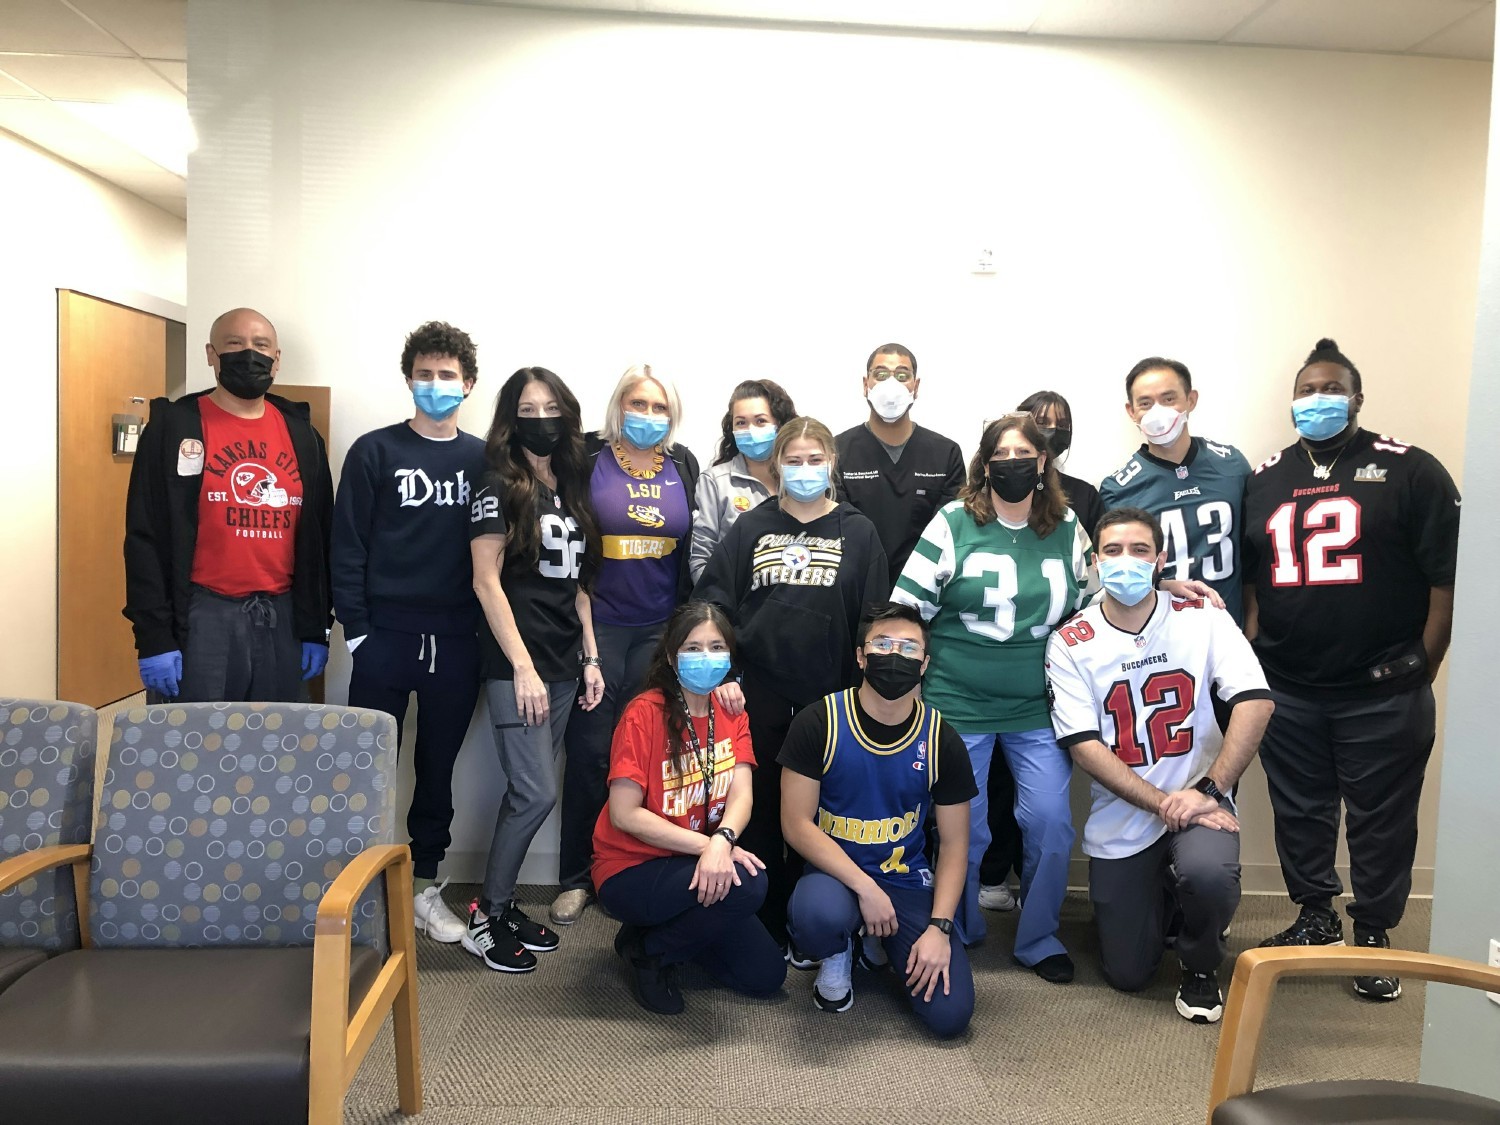 Our team kicked off Super Bowl day with a potluck and sported their favorite team jerseys during sports day.